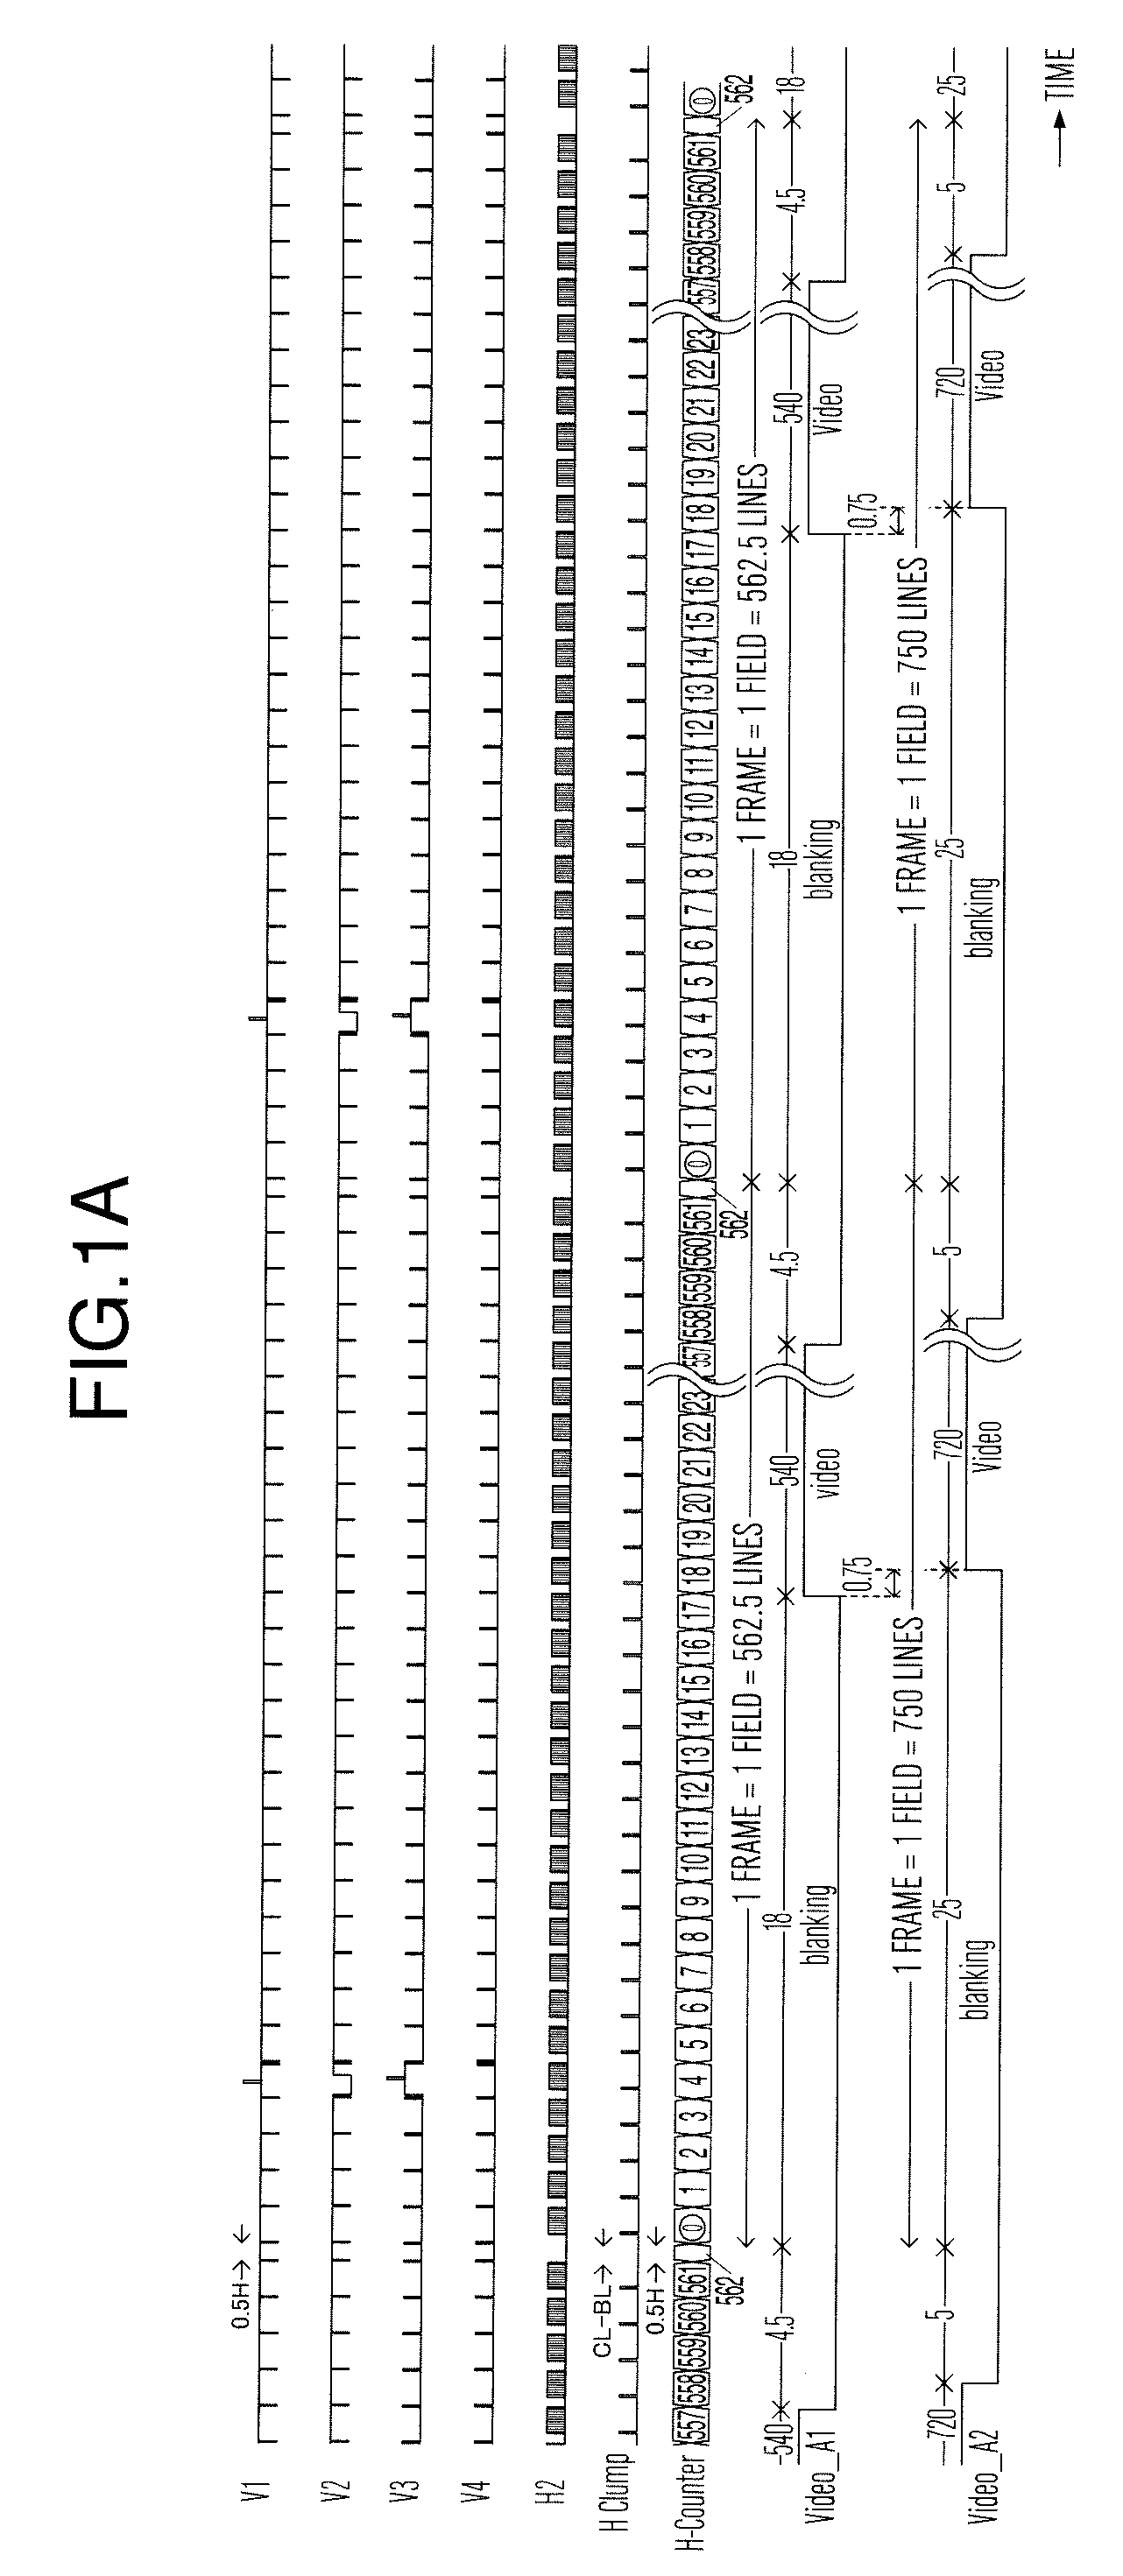 Video format conversion without a flicker for the solid imaging apparatus